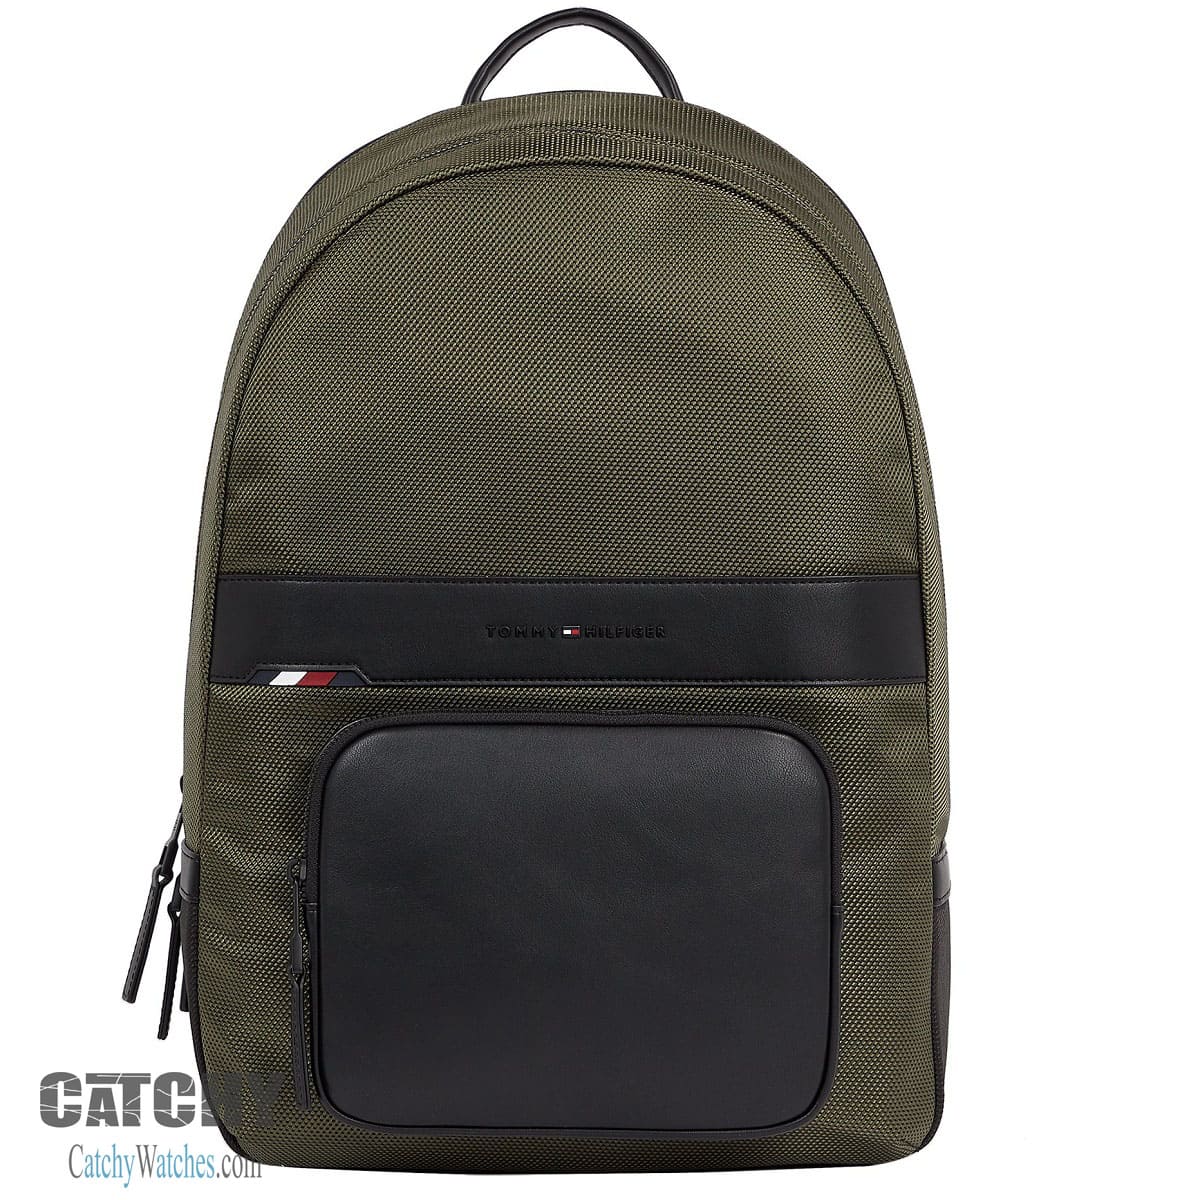 original-backpack-bag-tommy-hilfiger-oily-for-men-and-women-leather-fabric